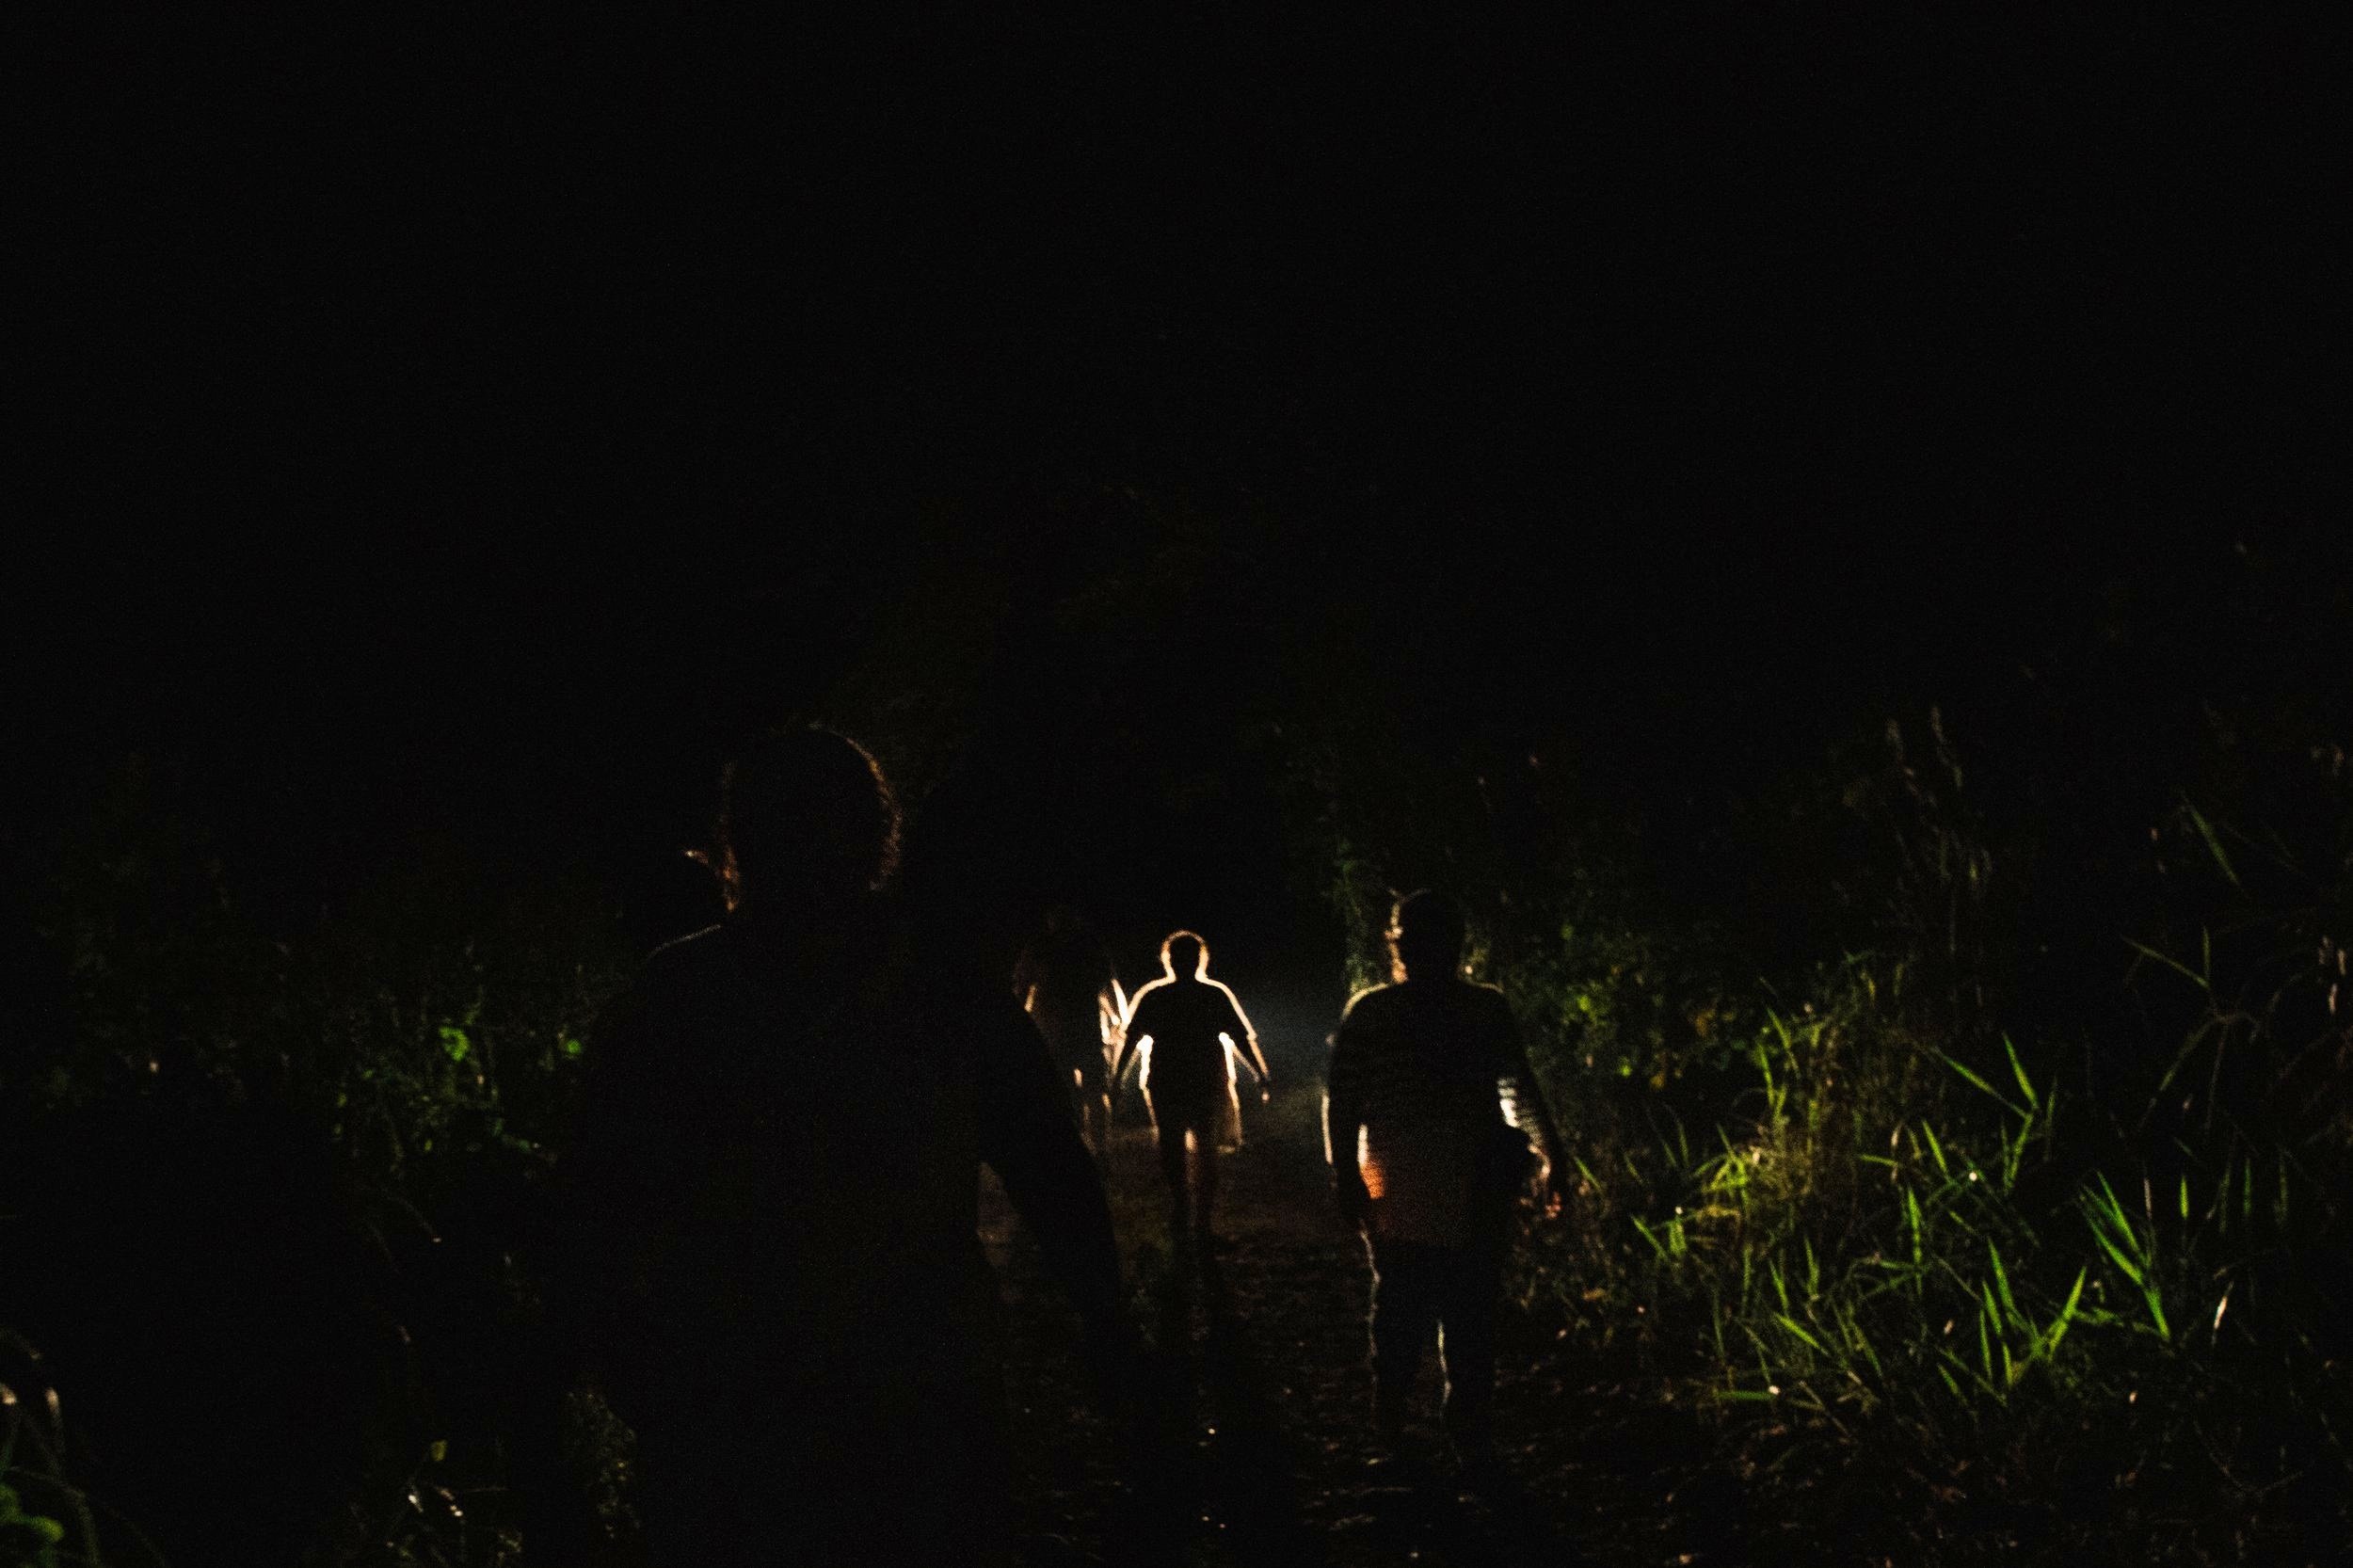  Deep into the night, the exhausted and determined mothers walk back from their final remote stop, having spent a long day searching for their missing loved ones, to rejoin the caravan in Tapachula, Chiapas, Mexico. 